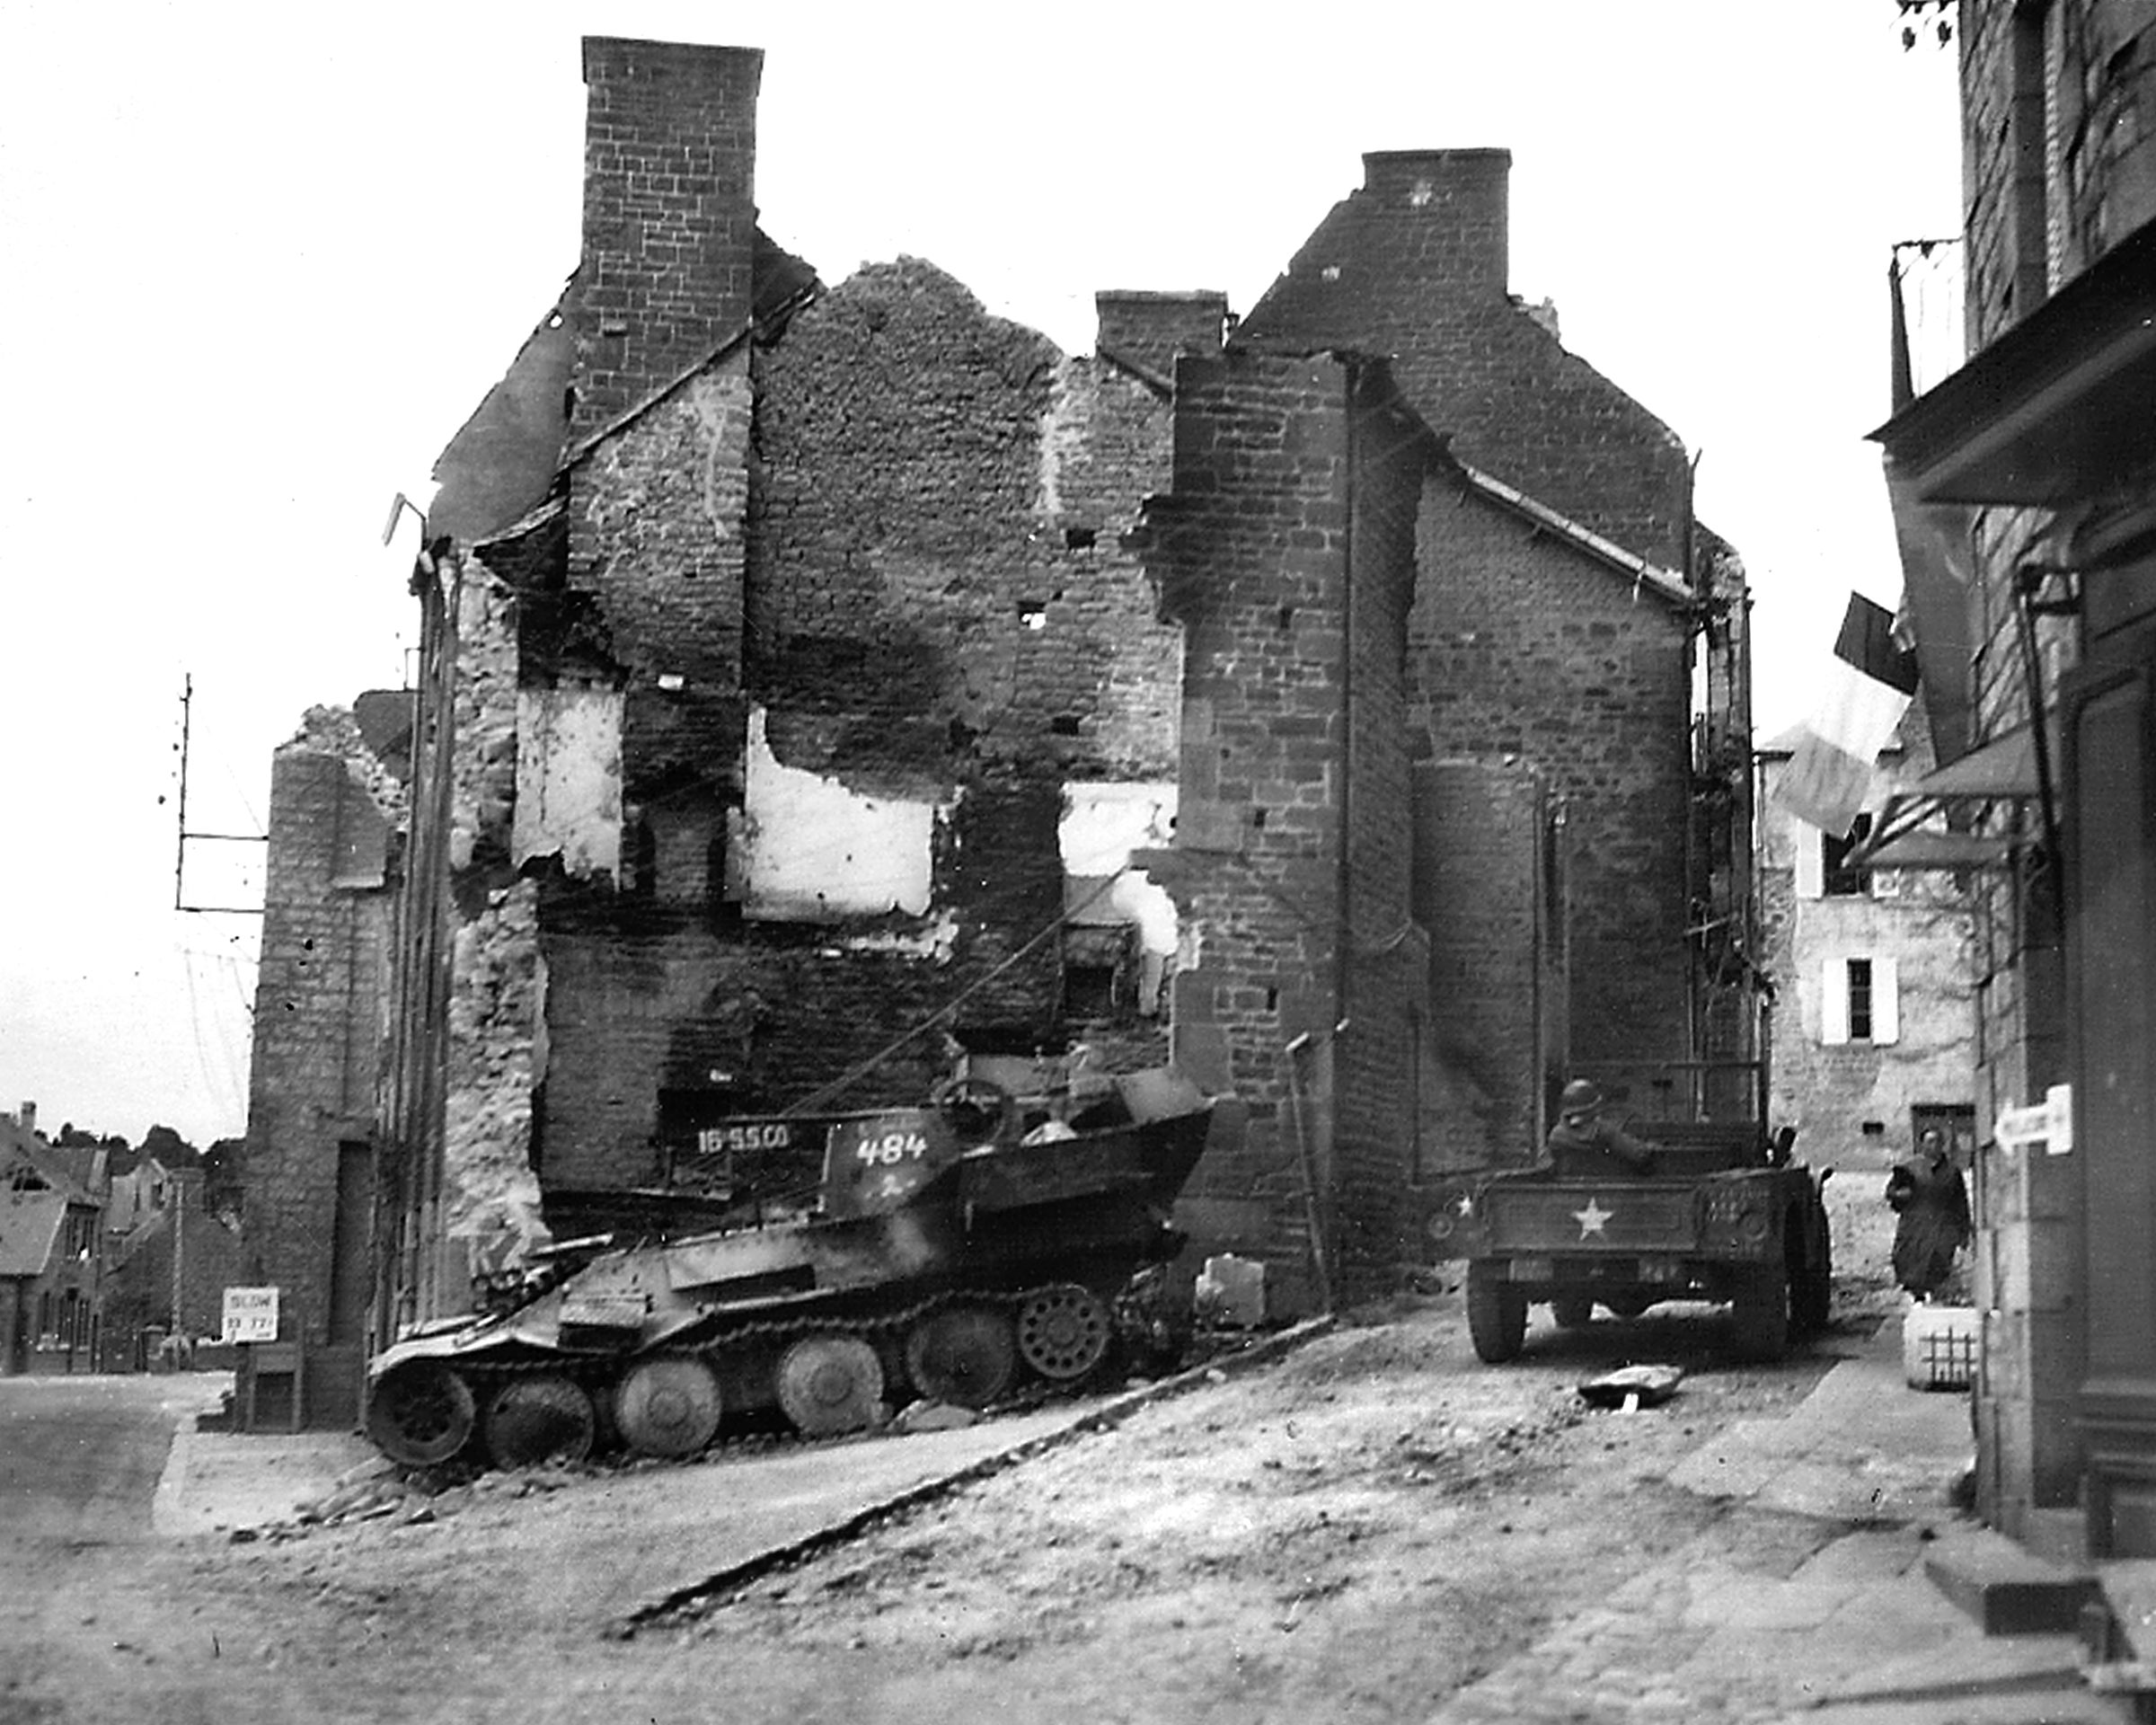 An American three-quarter-ton Dodge weapons carrier WC-51 passes a destroyed German armored vehicle, a victim of the fierce fighting in Carentan several weeks earlier.